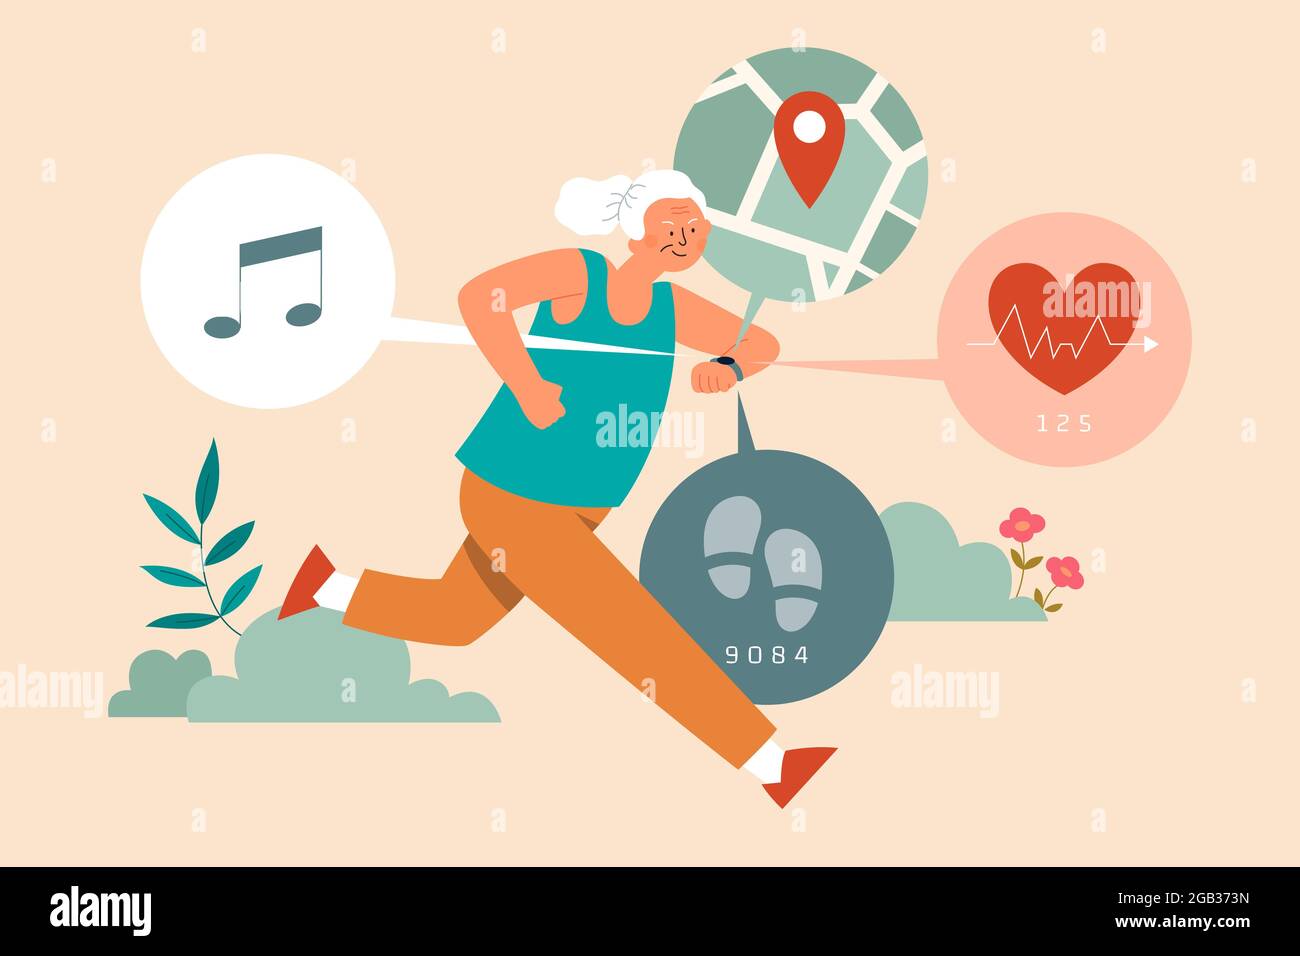 Flat illustration of a senior woman wearing a fitness tracker watch with pedometer, heart rate sensor, GPS, and music app while running outdoor Stock Vector